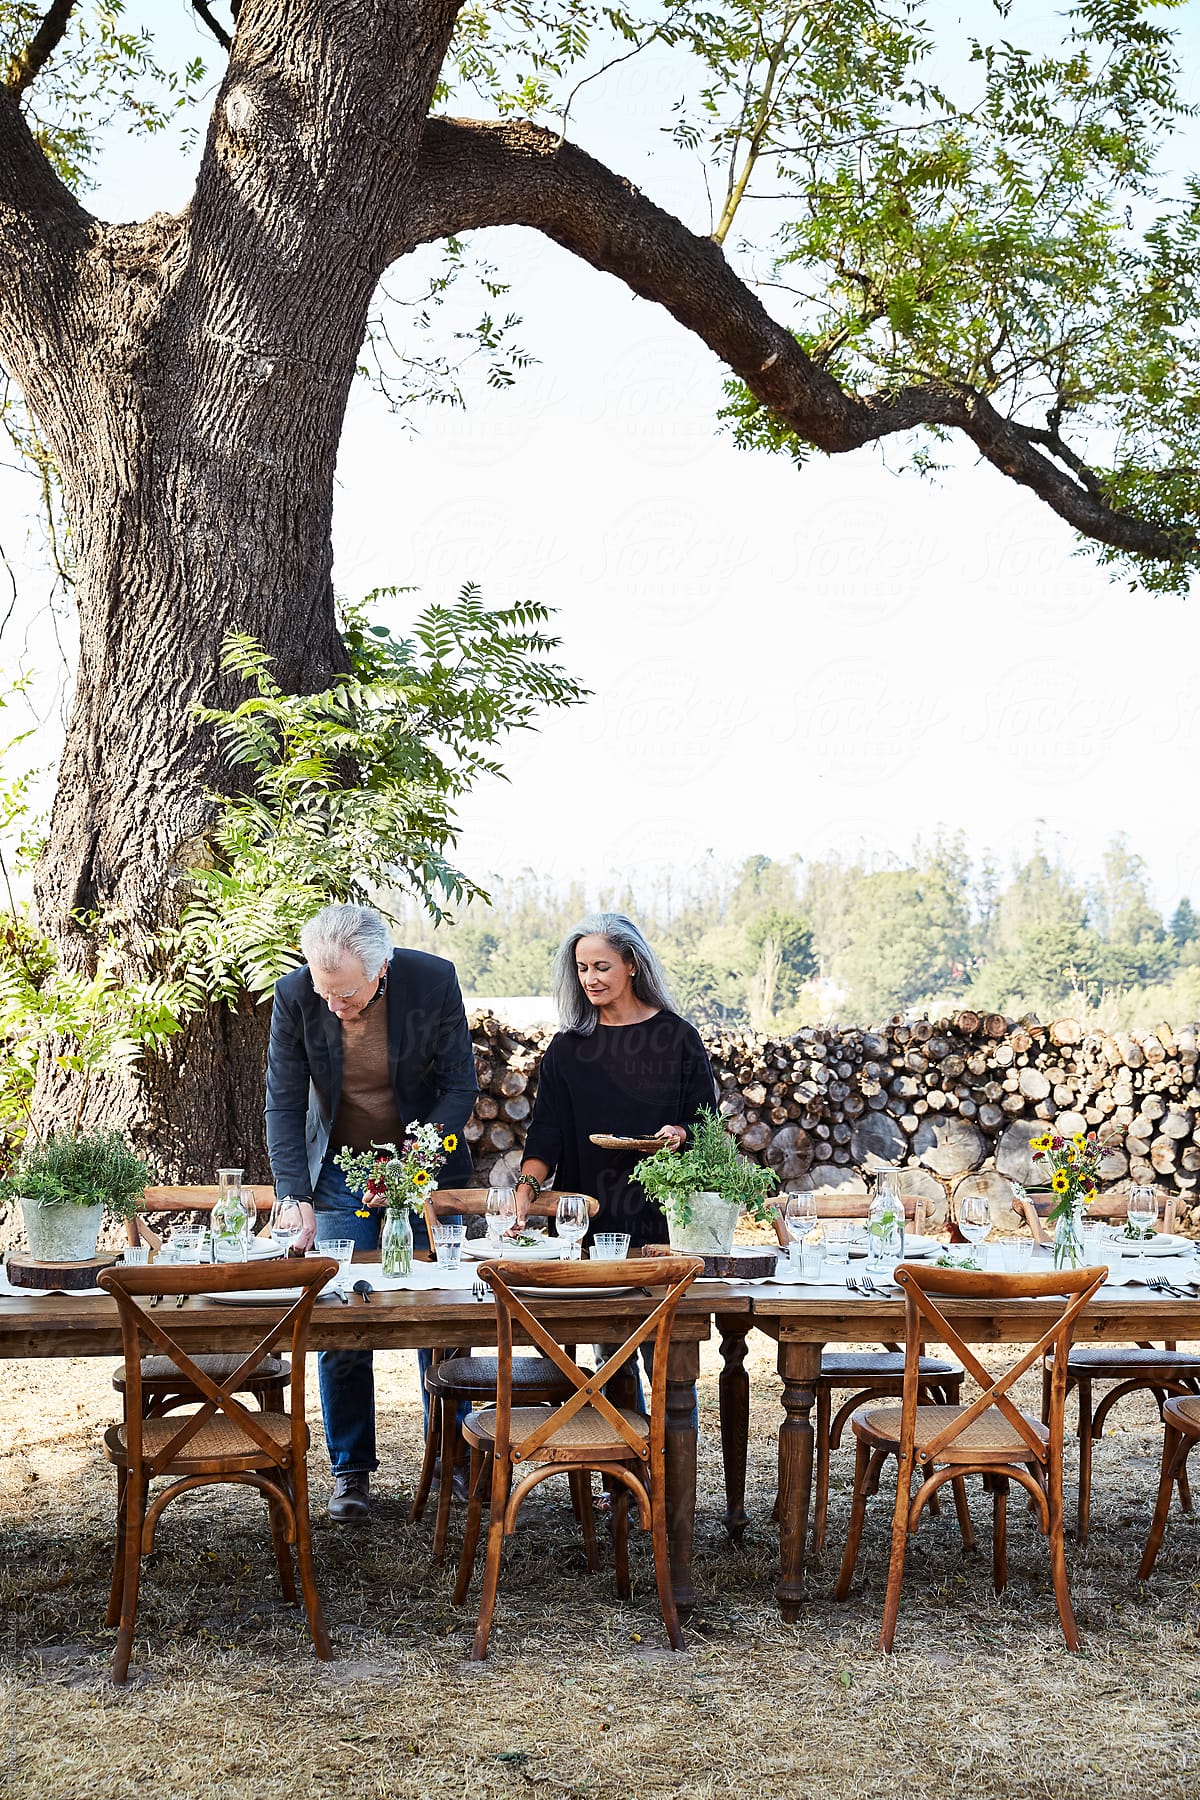 Mature senior couple setting the table for an outdoor dinner party